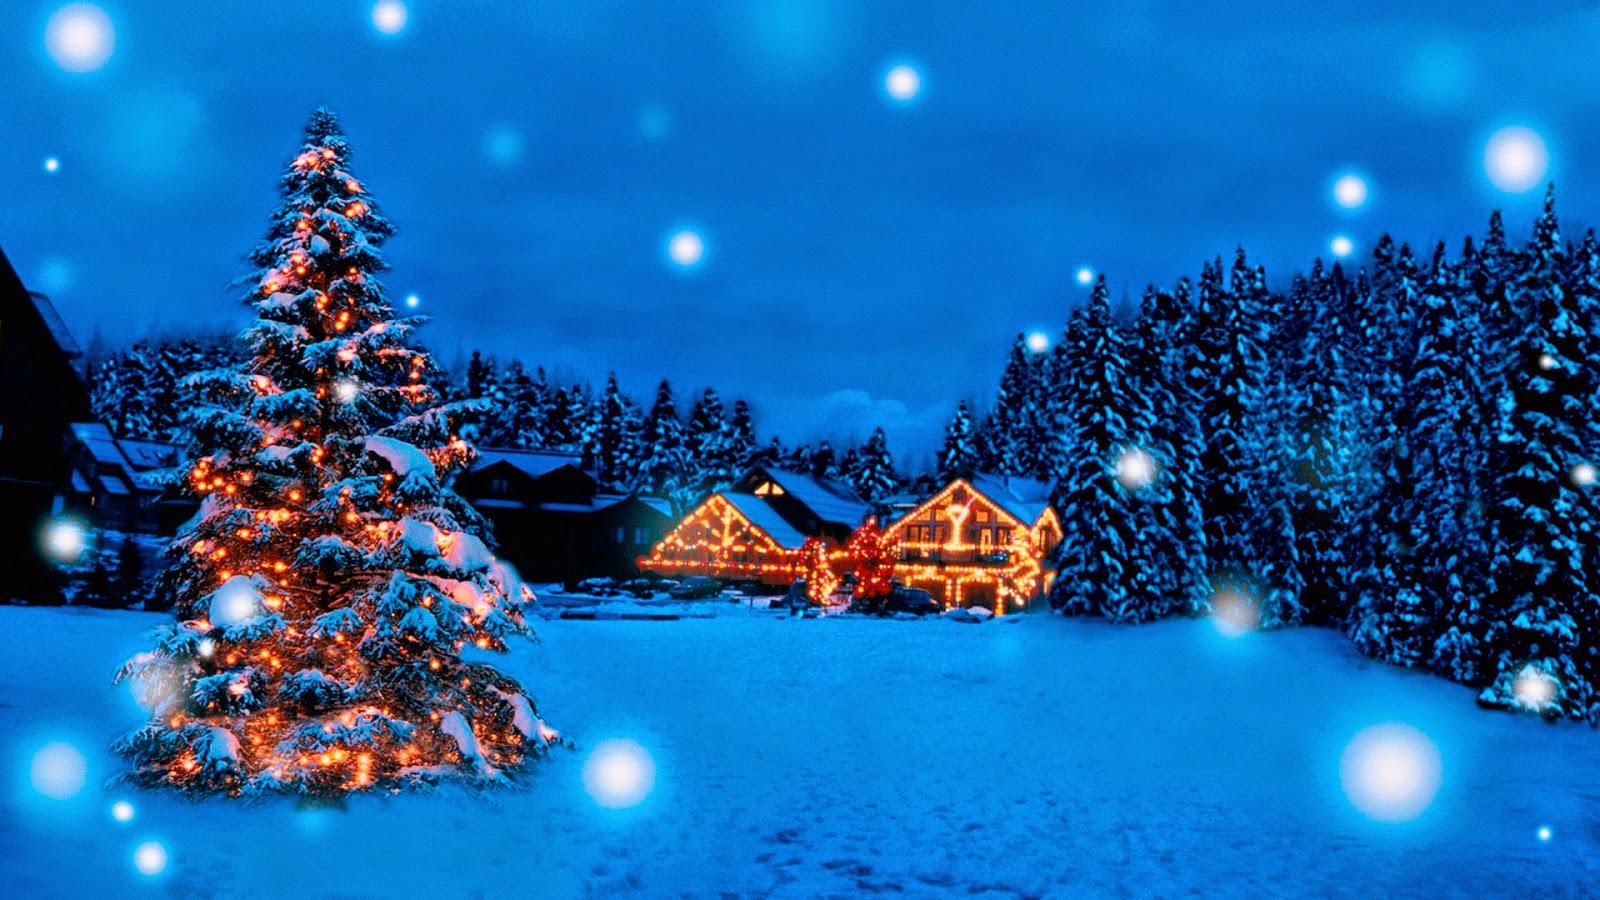 50 Beautiful Christmas Wallpapers and Backgrounds  Tech Buzz Online